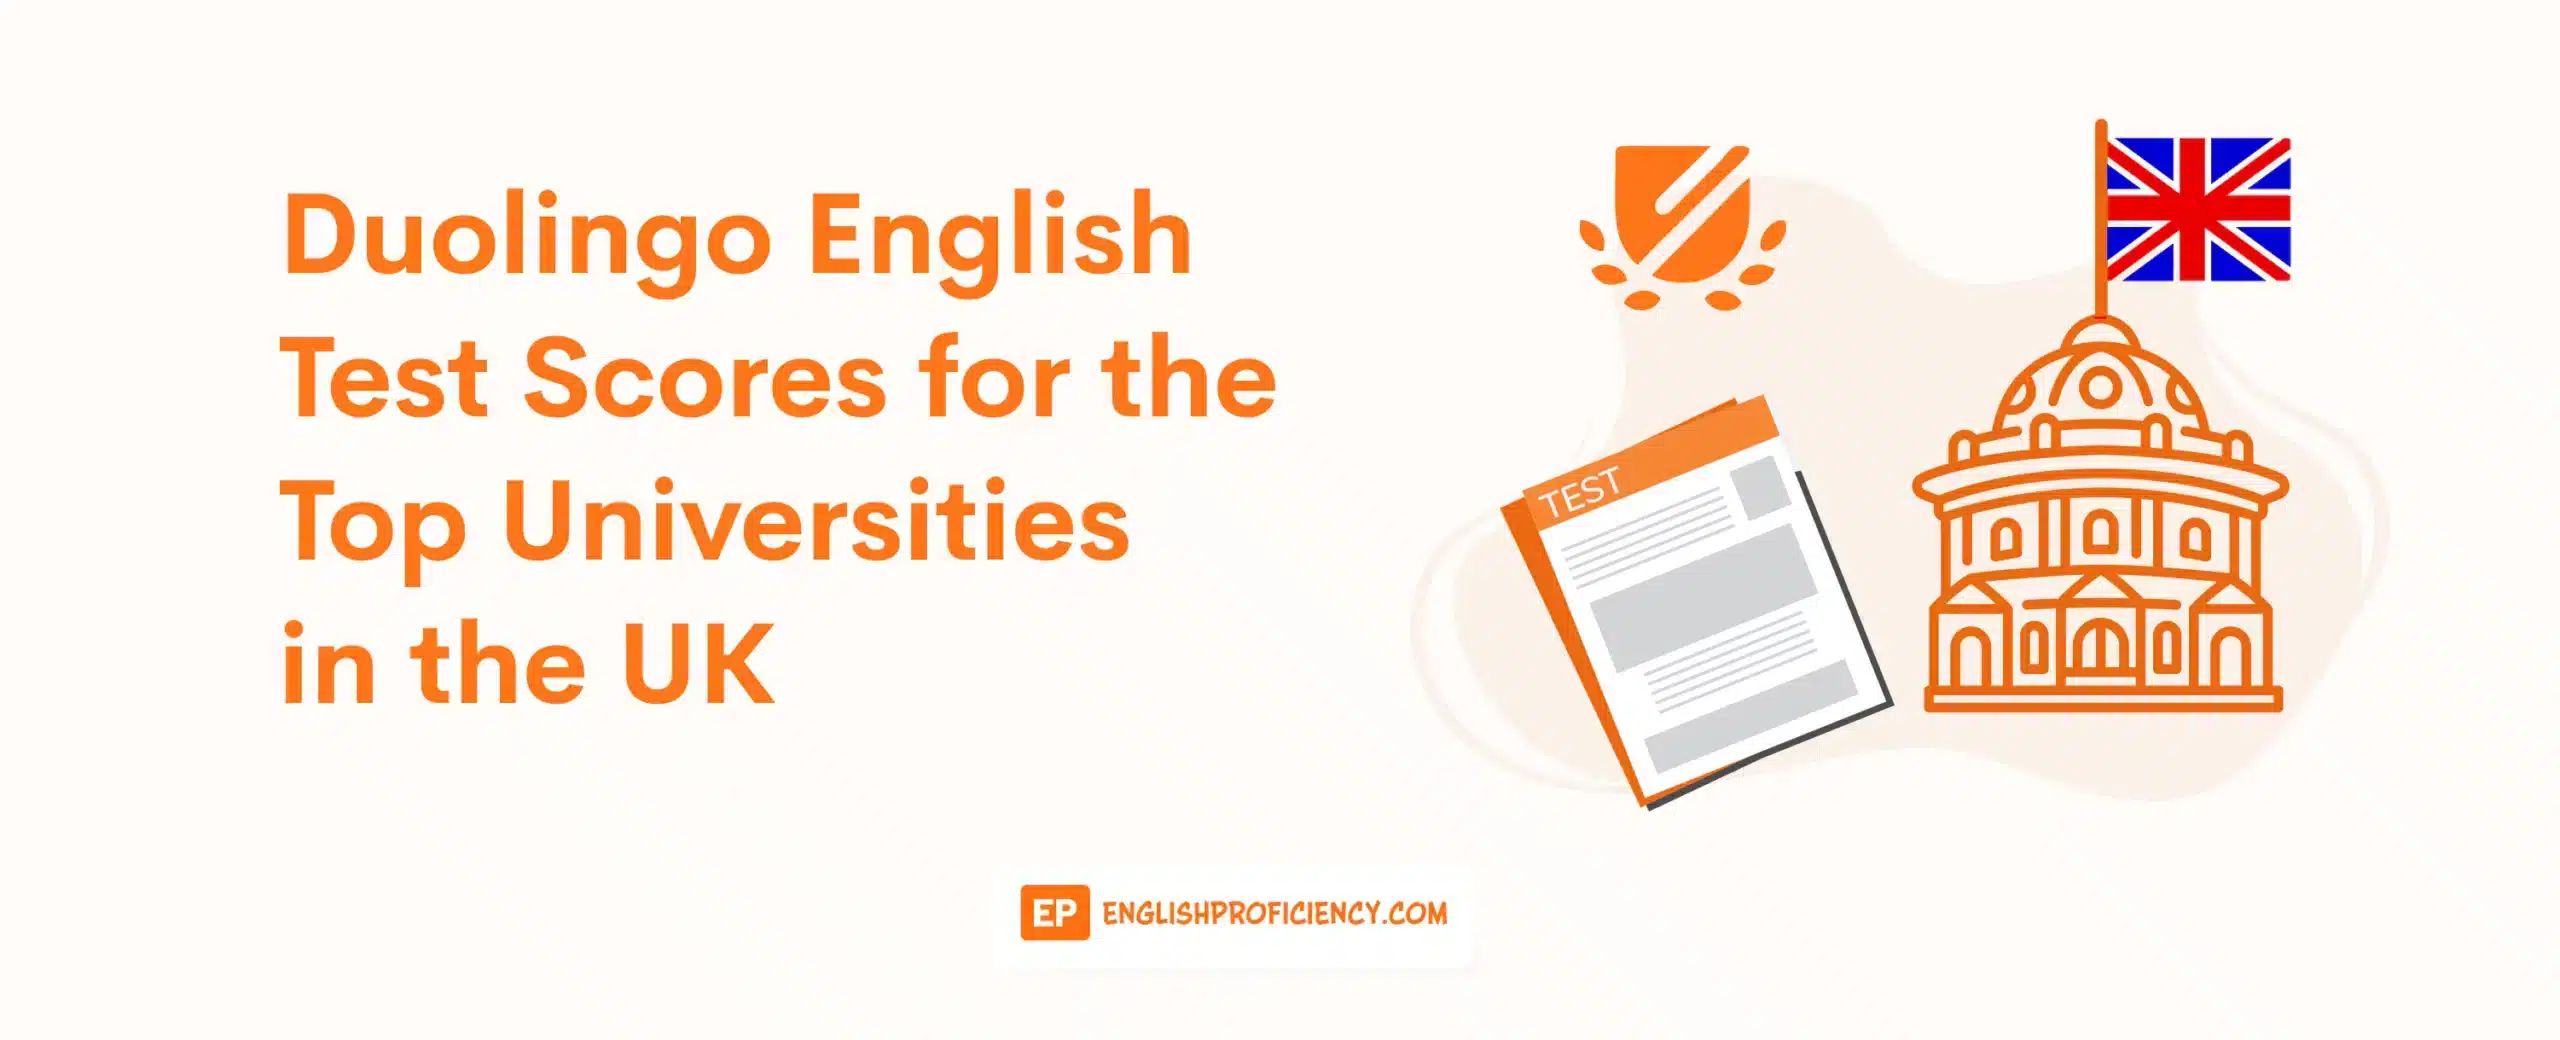 Duolingo English Test Scores for the Top Universities in the UK